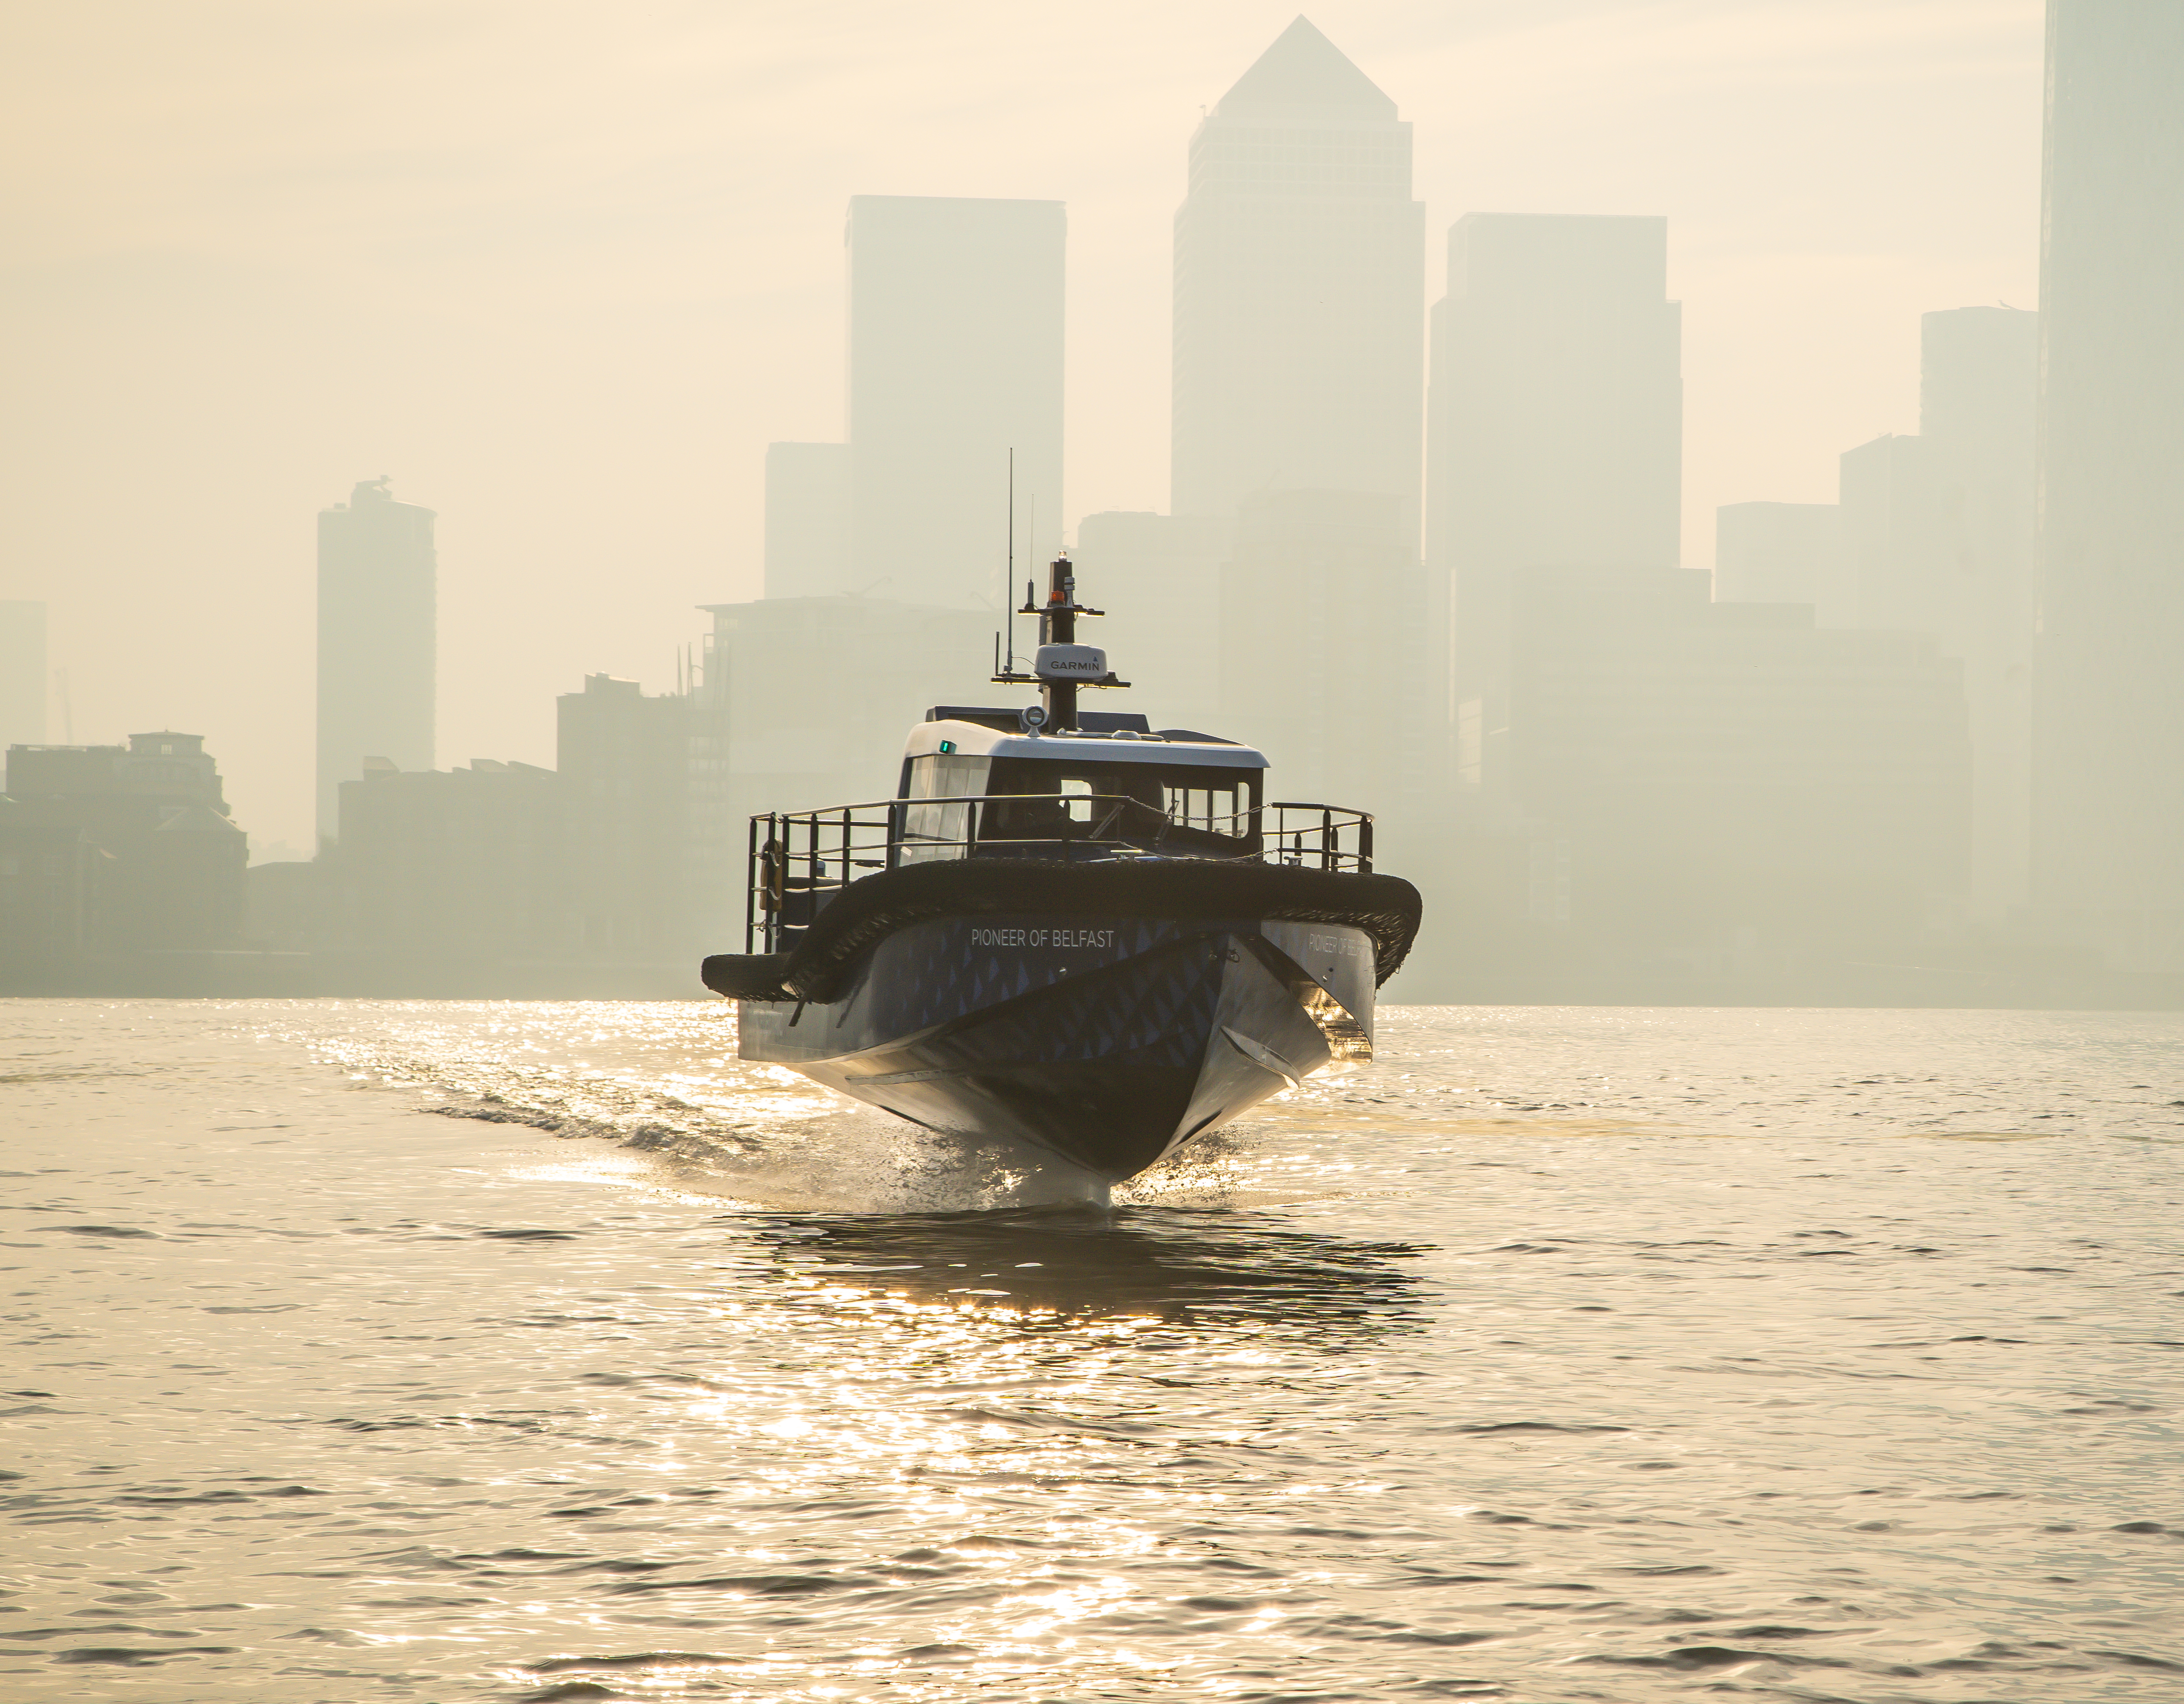 A workboat foiling against a backdrop of skyscrapers